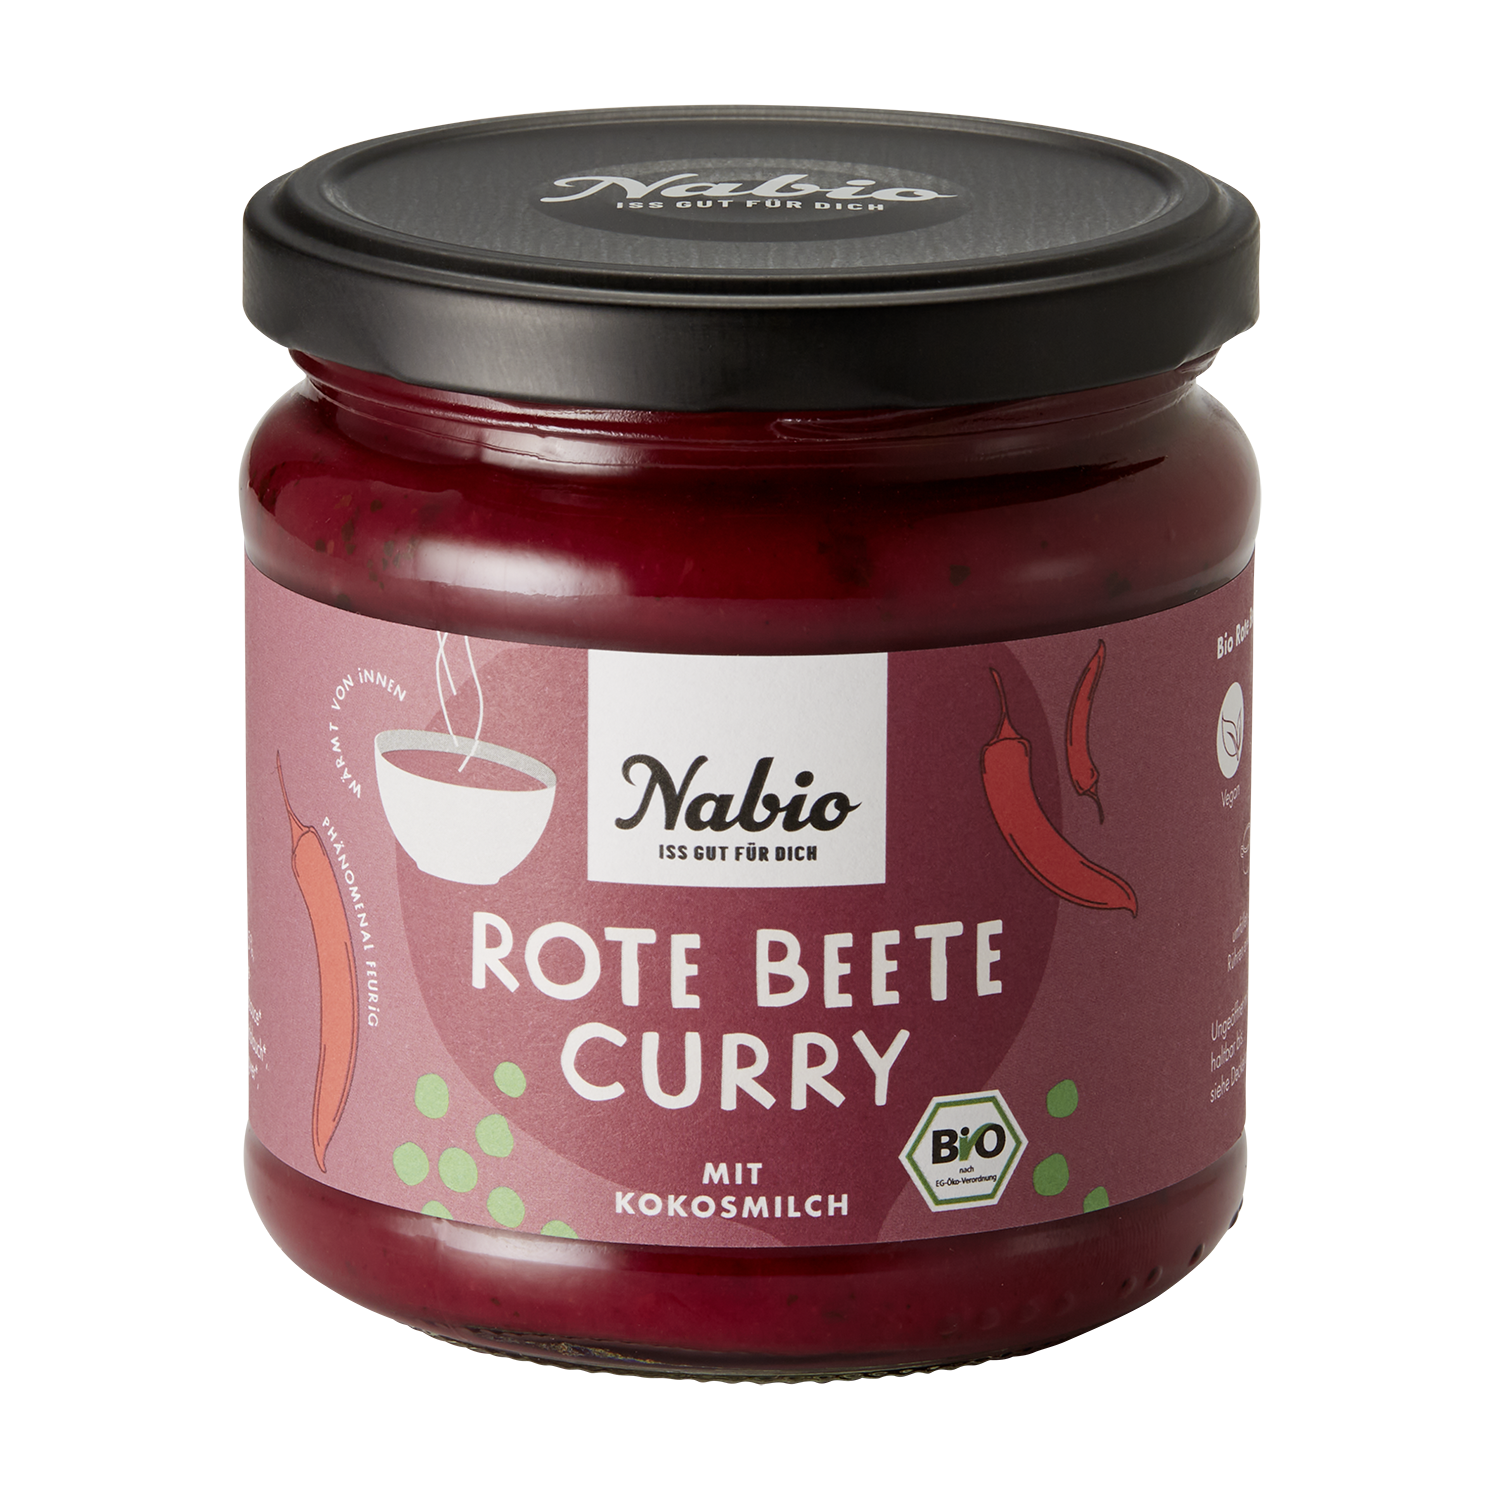 Rote Beete Curry - Nabio